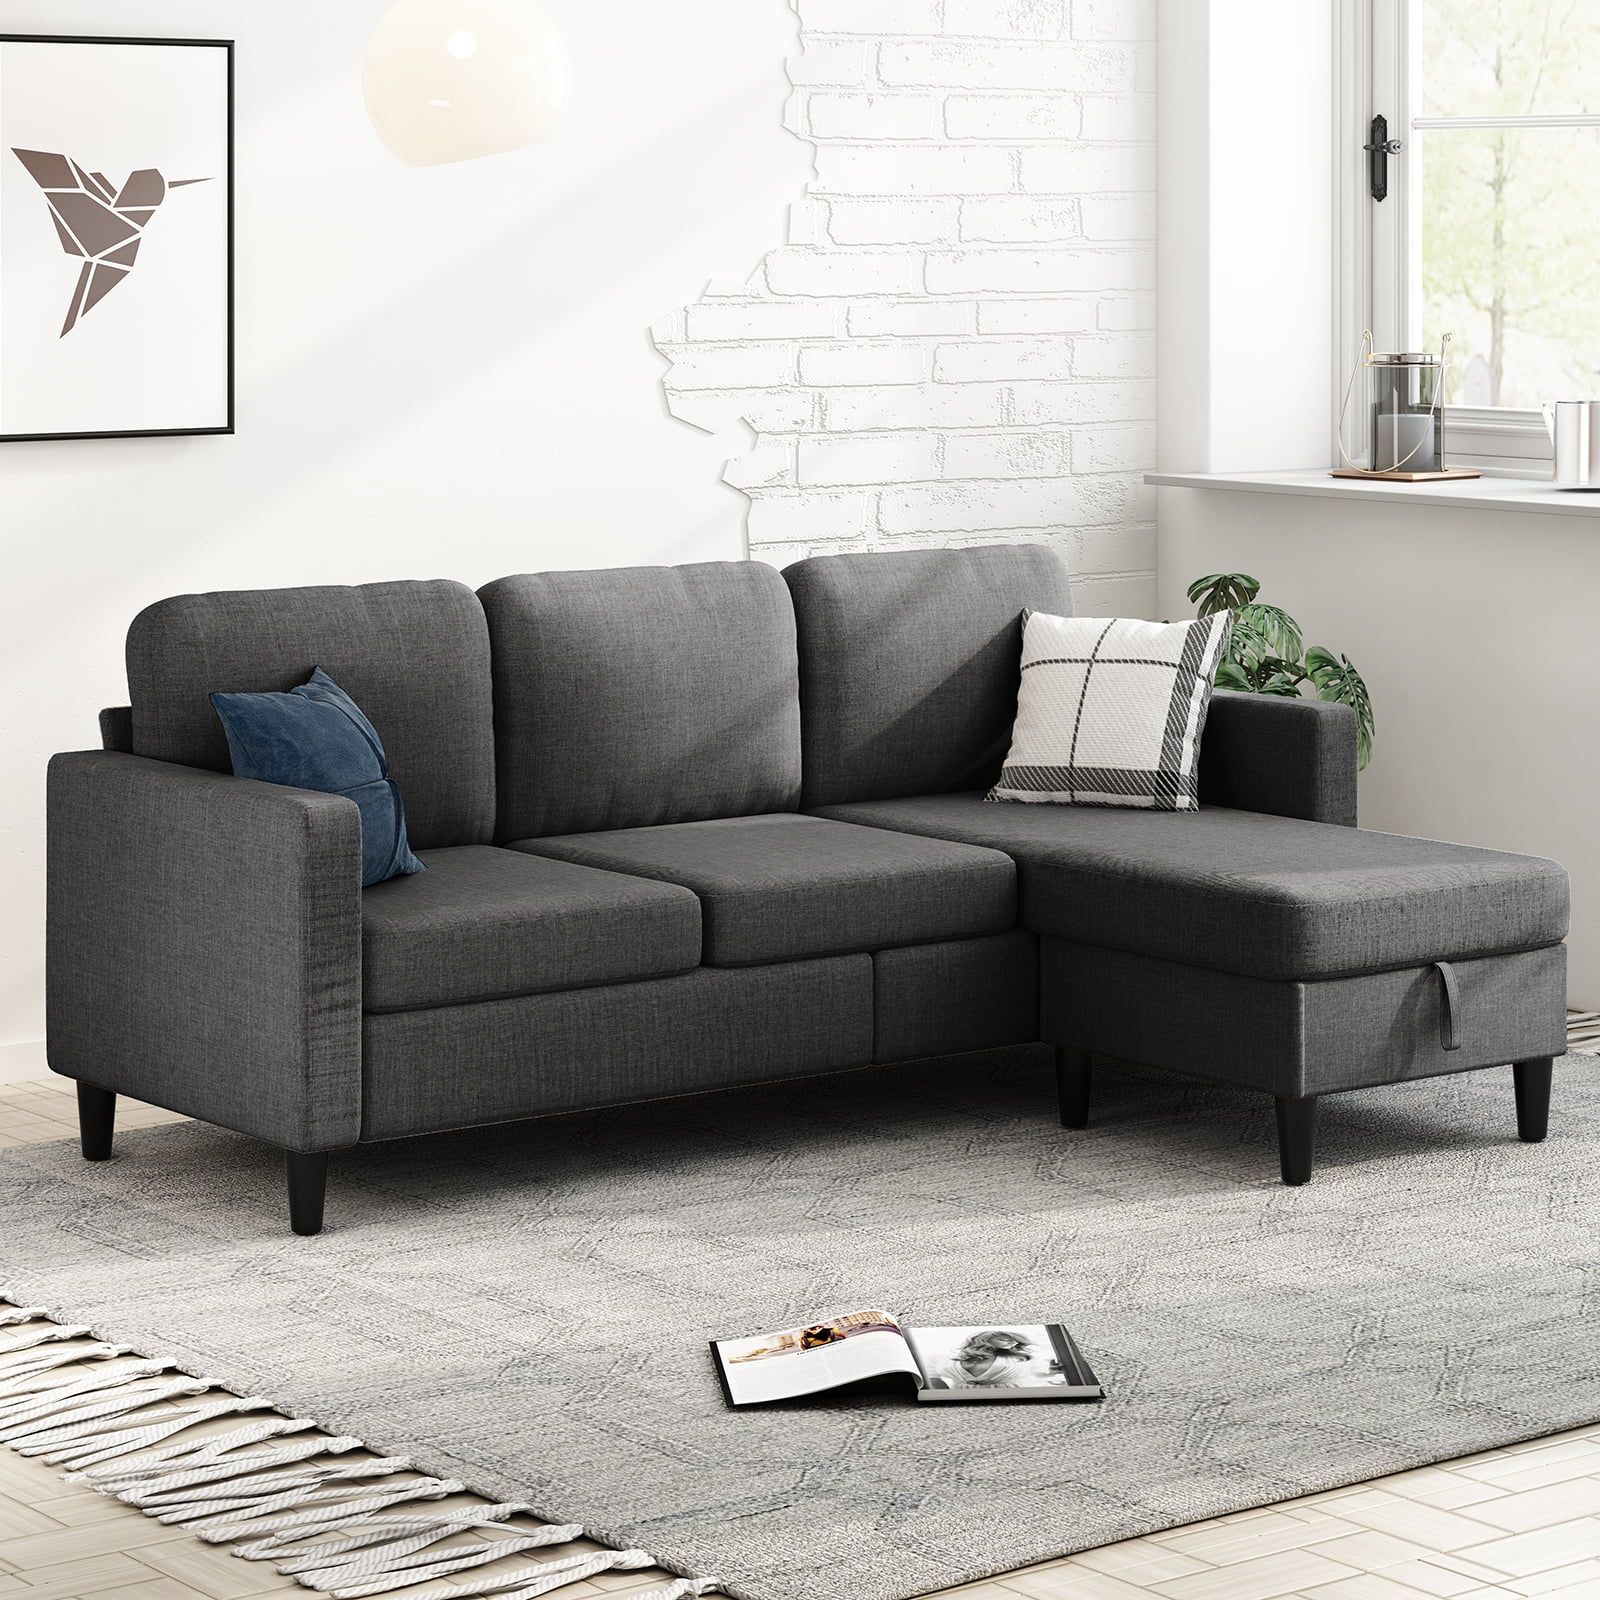 Muzz Sectional Sofa With Movable Ottoman, Free Combination Sectional Couch,  Small L Shaped Sectional Sofa With Storage Ottoman, Modern Linen Fabric Sofa  Set For Living Room (Dark Grey) – Walmart Regarding Modern Linen Fabric L Shaped Couches (View 4 of 15)